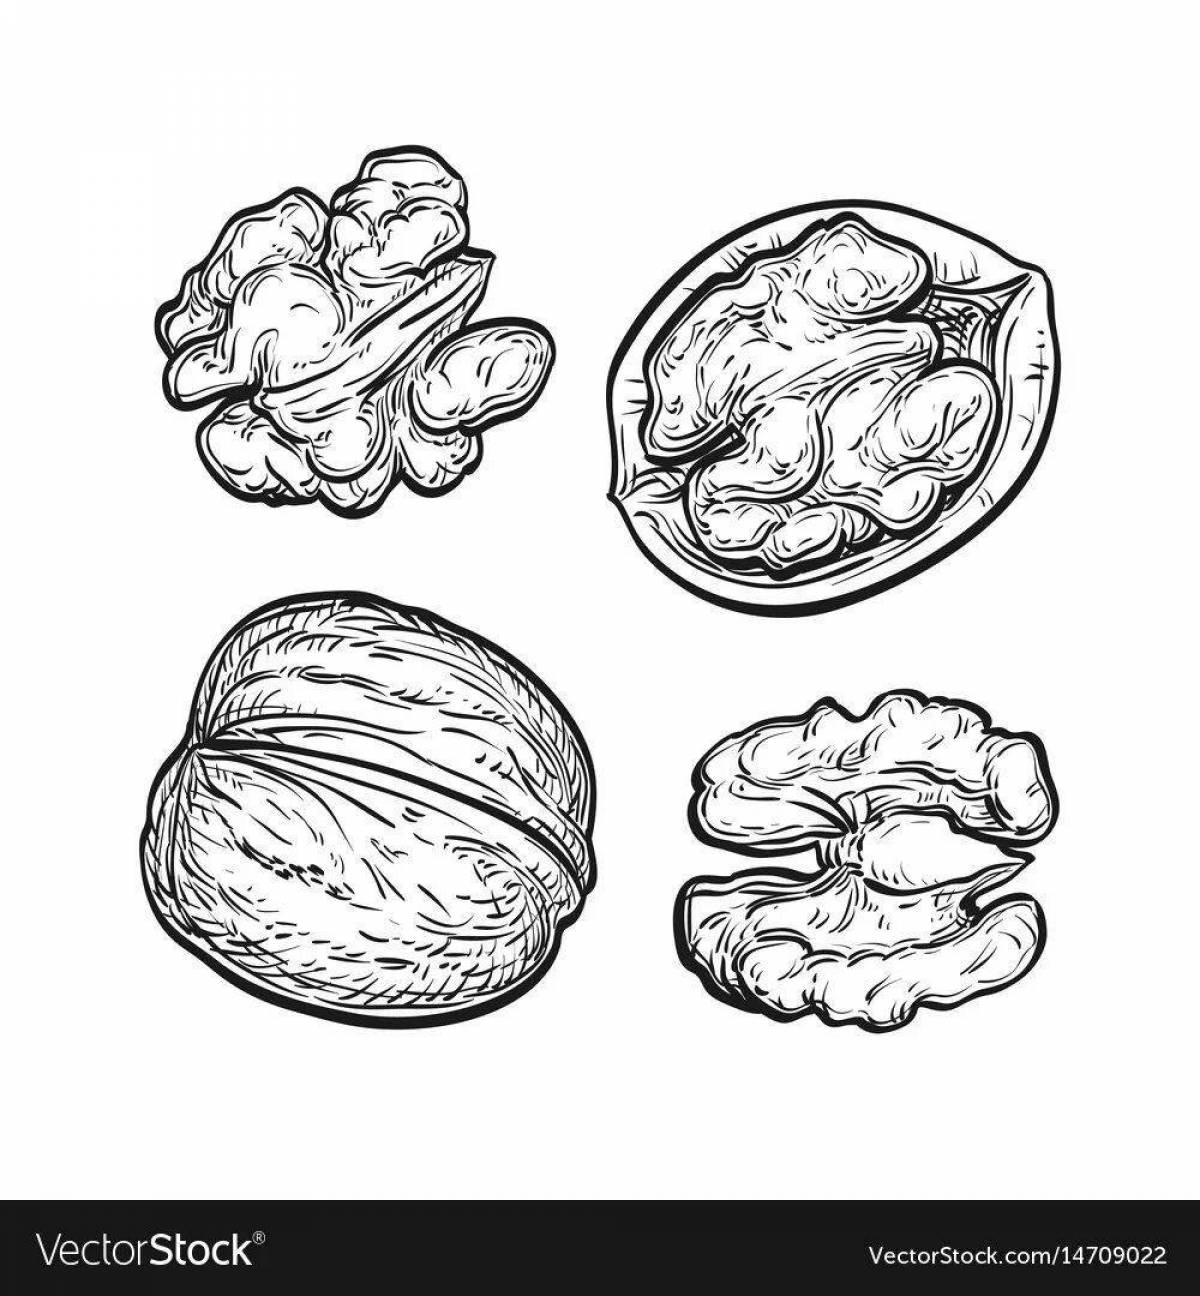 Amazing walnut coloring page for babies